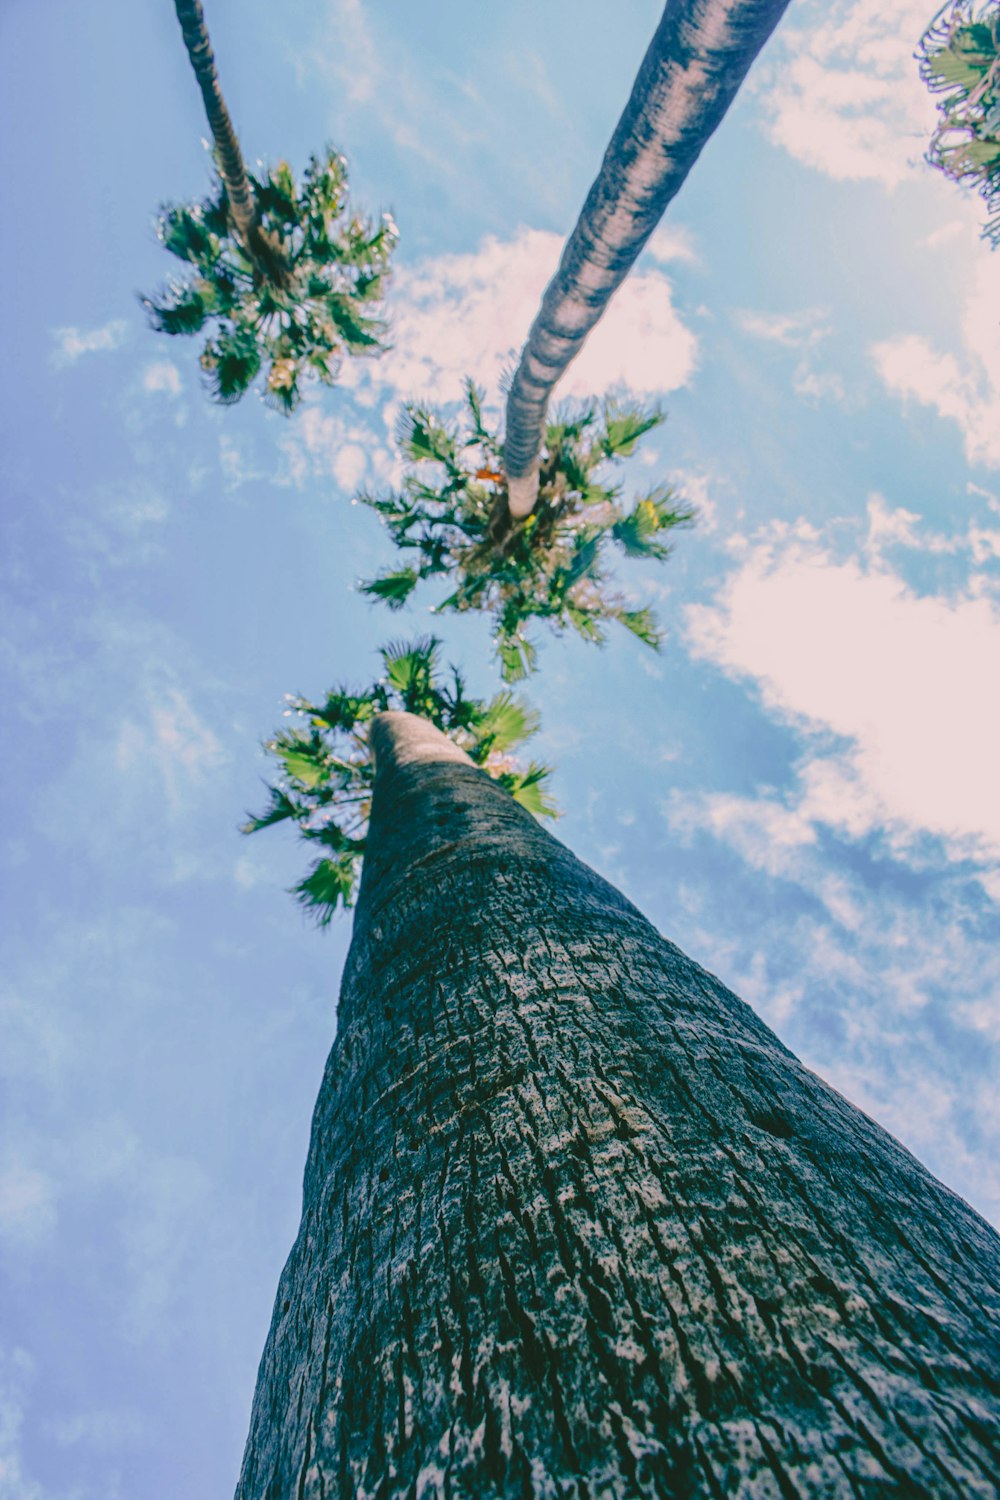 looking up at a tall palm tree from below